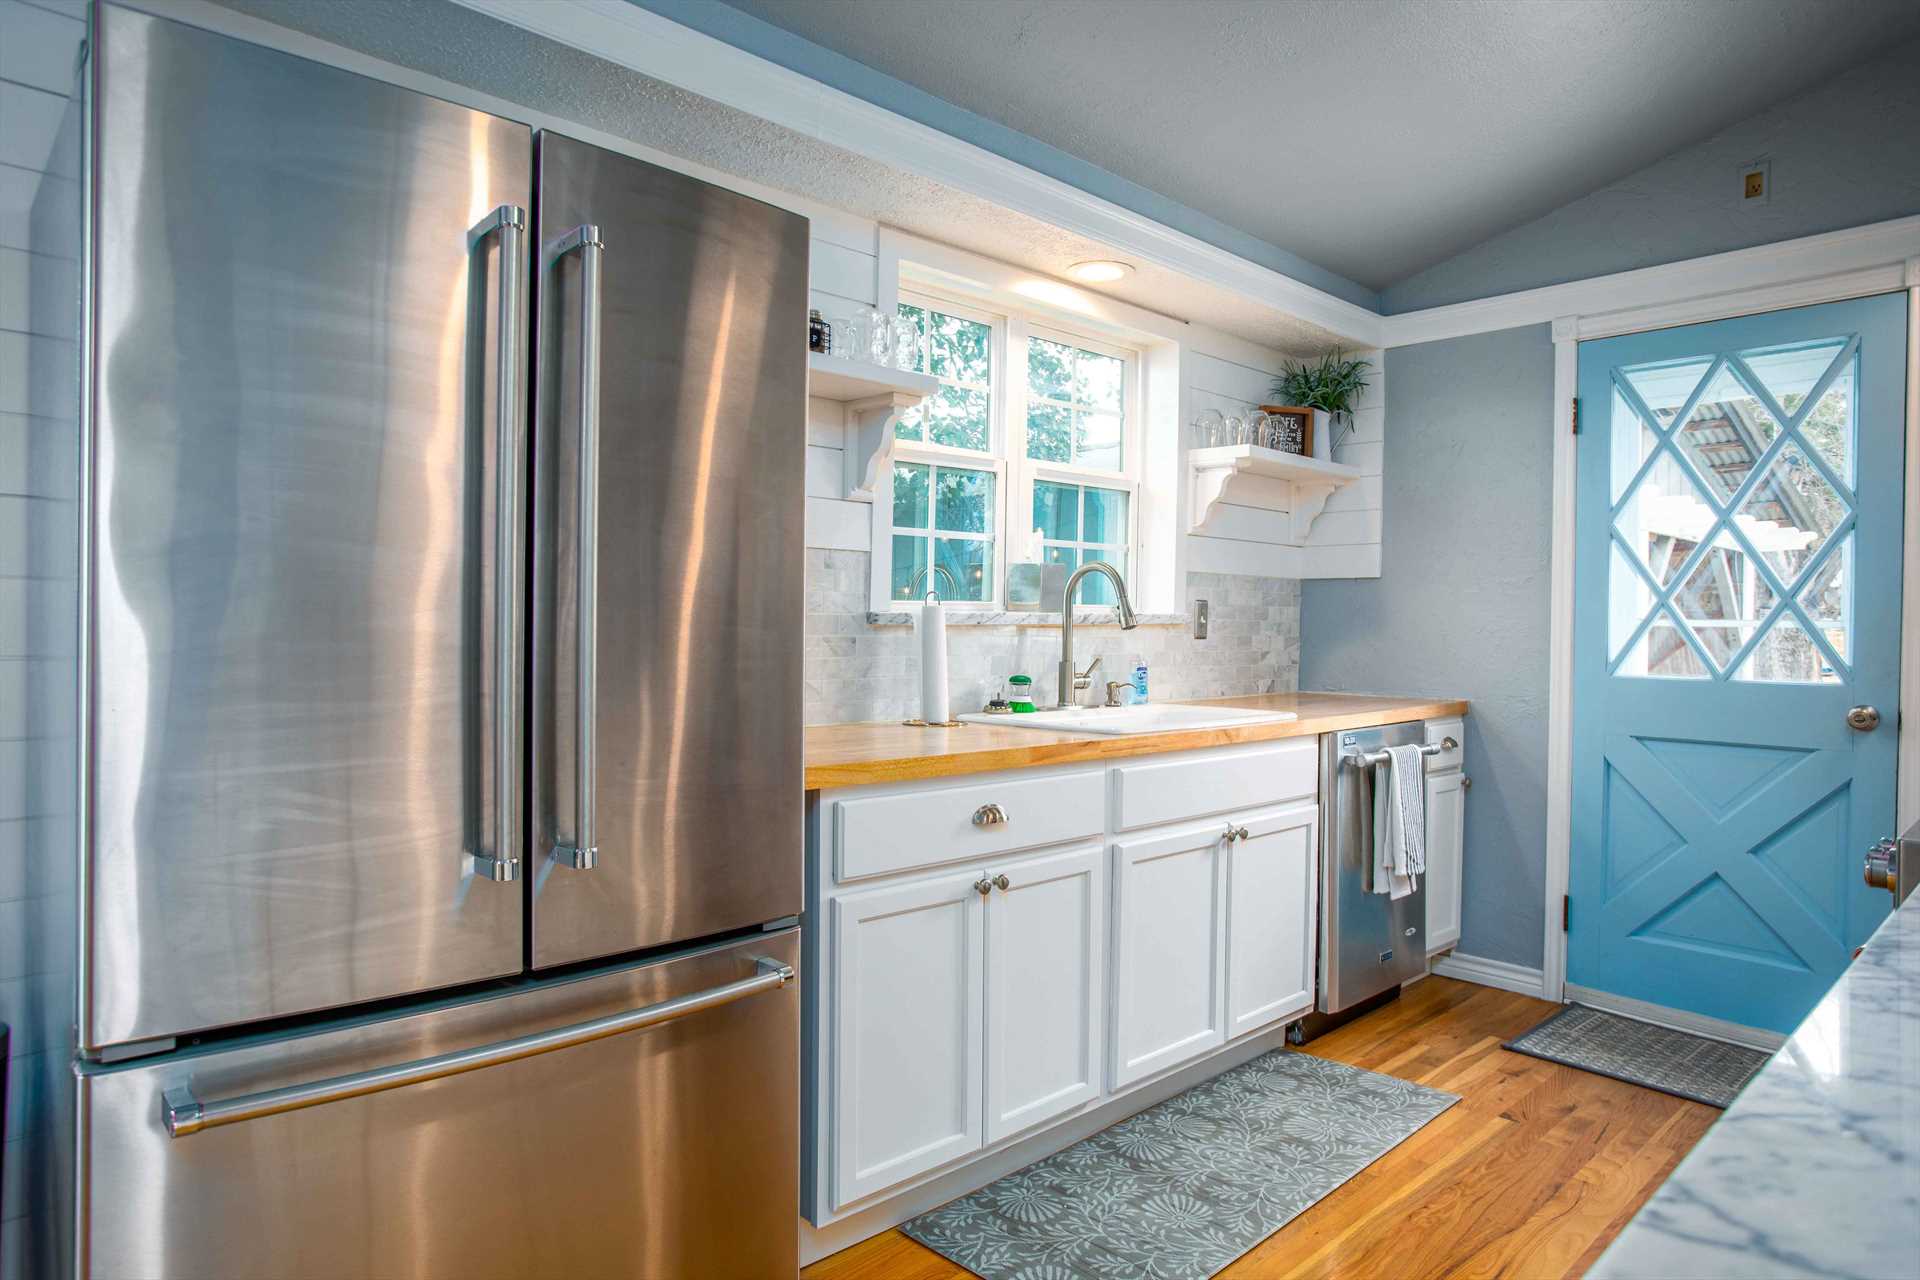                                                 The hardwood floors, color, and decor highlight the charms and comforts of a genuine country kitchen.